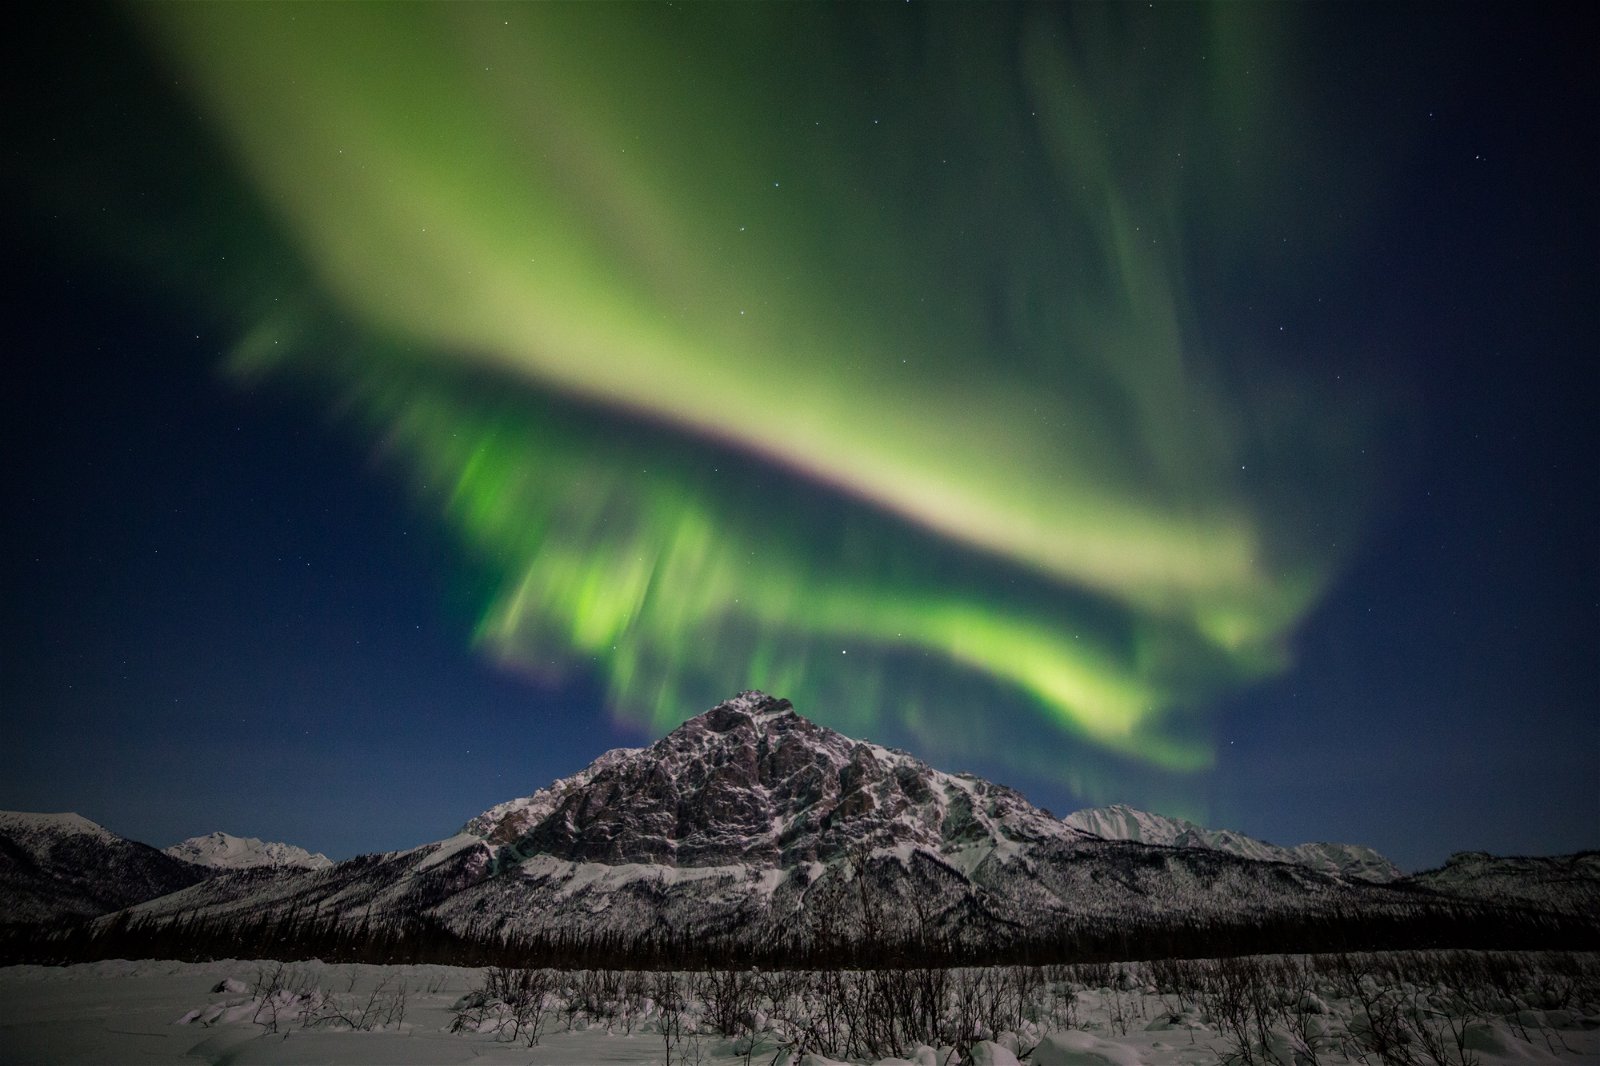 Bright green northern lights above a snowy. mountain and landscape